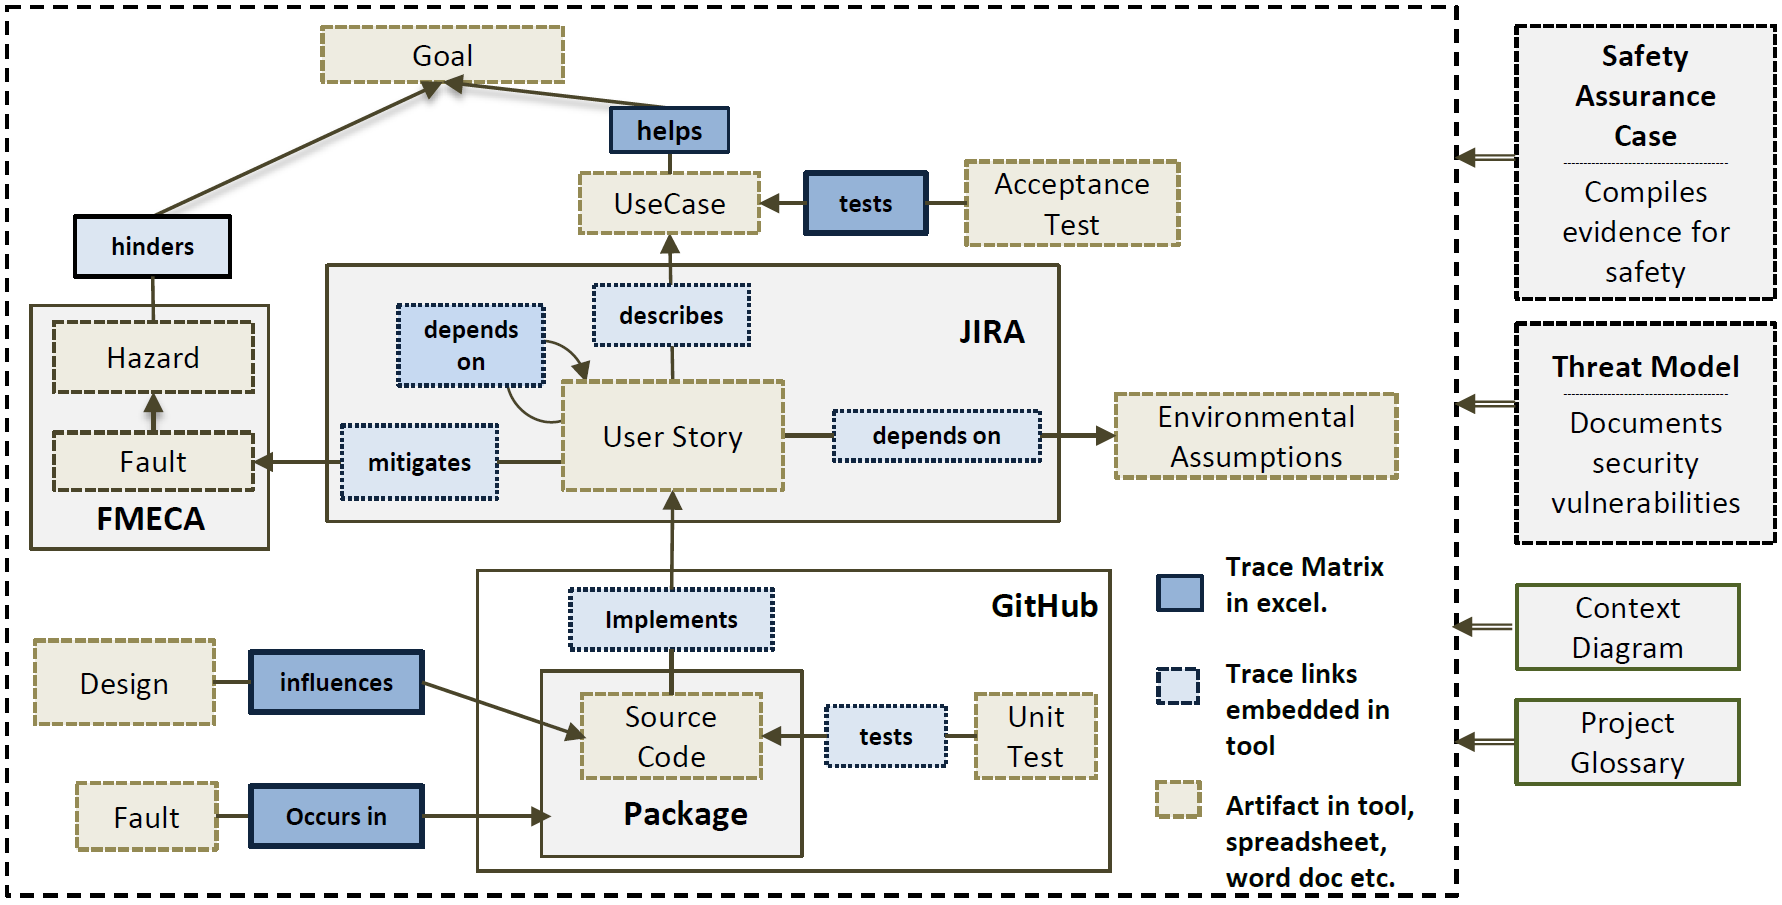 Traceability Information Model showing a variety of artifacts and trace matrices.